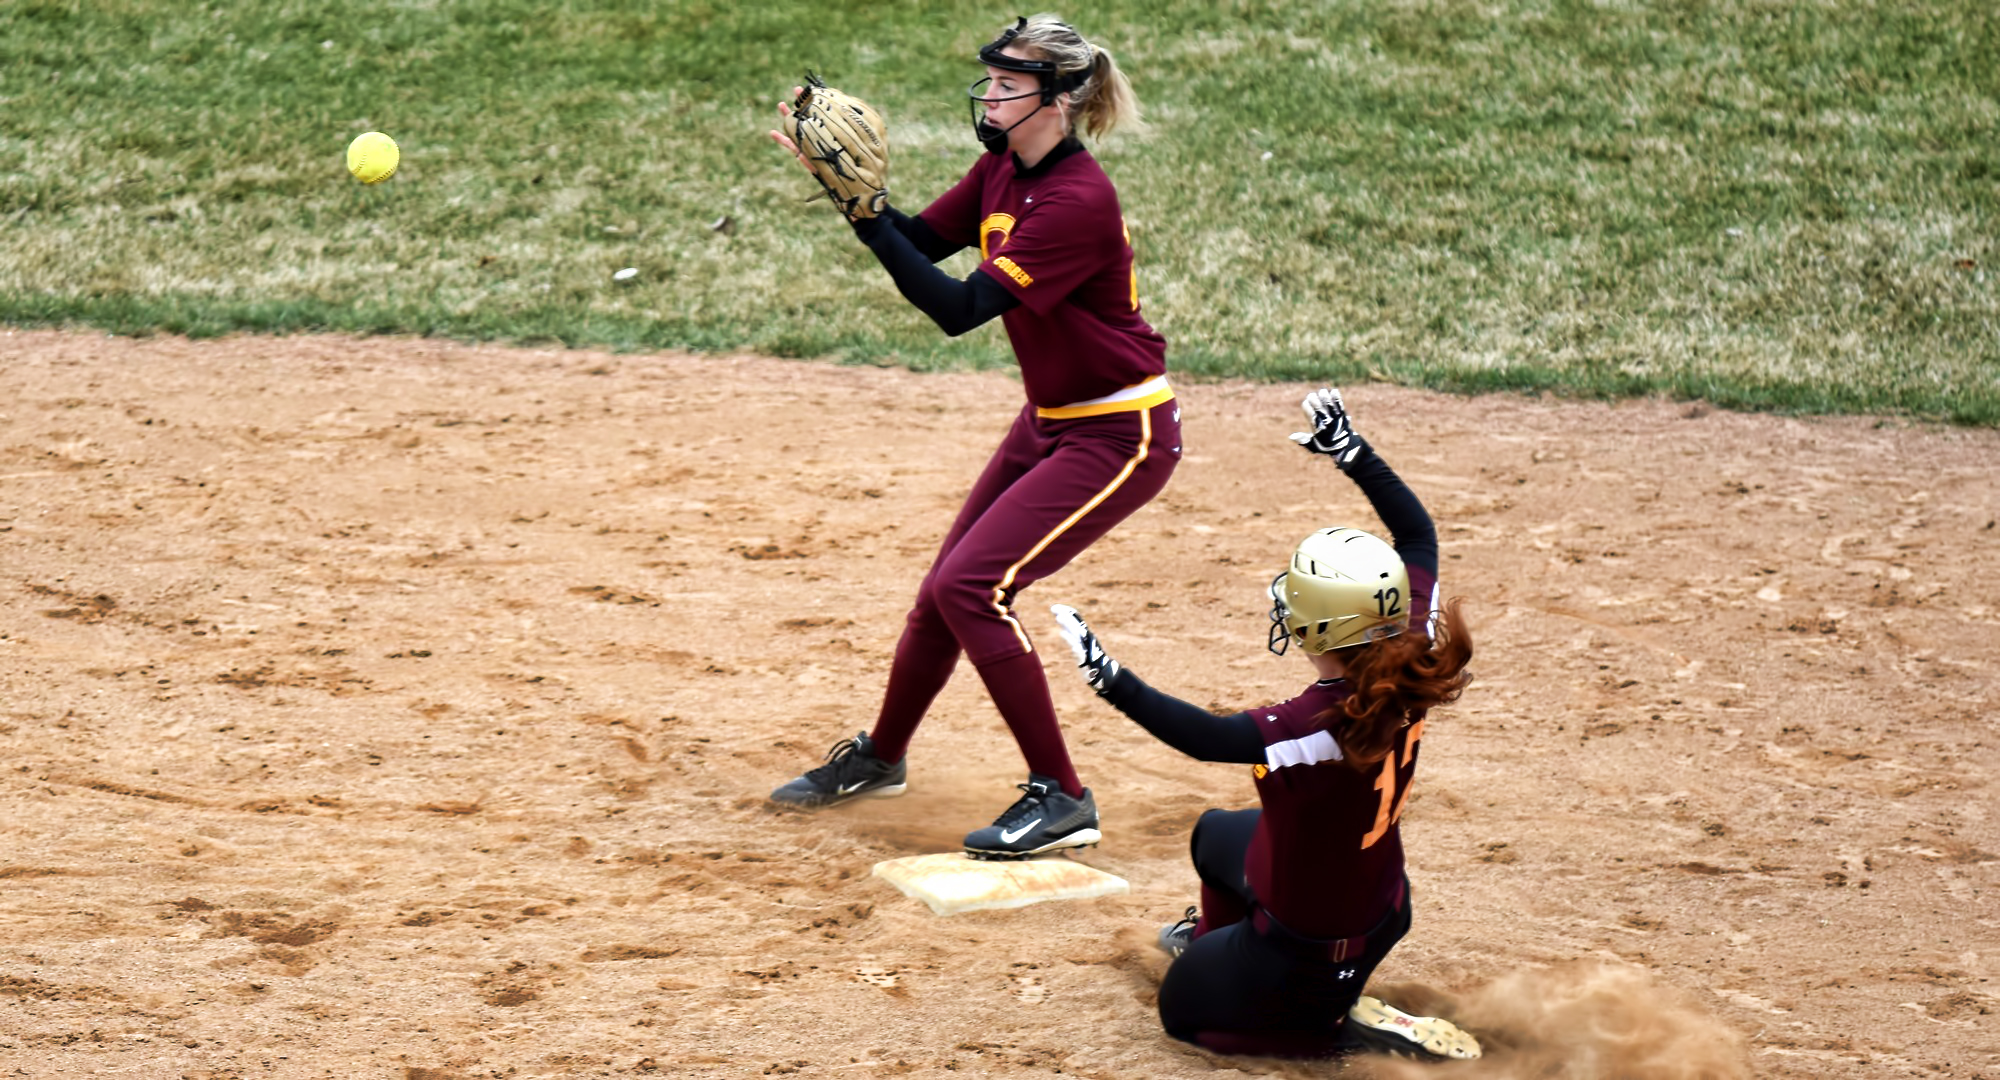 Freshman Megan Gavin gets ready to make the force out at send base during the Cobbers' sweep over UM-Morris. She earned the win in the first game and also added to her team-leading home run total.